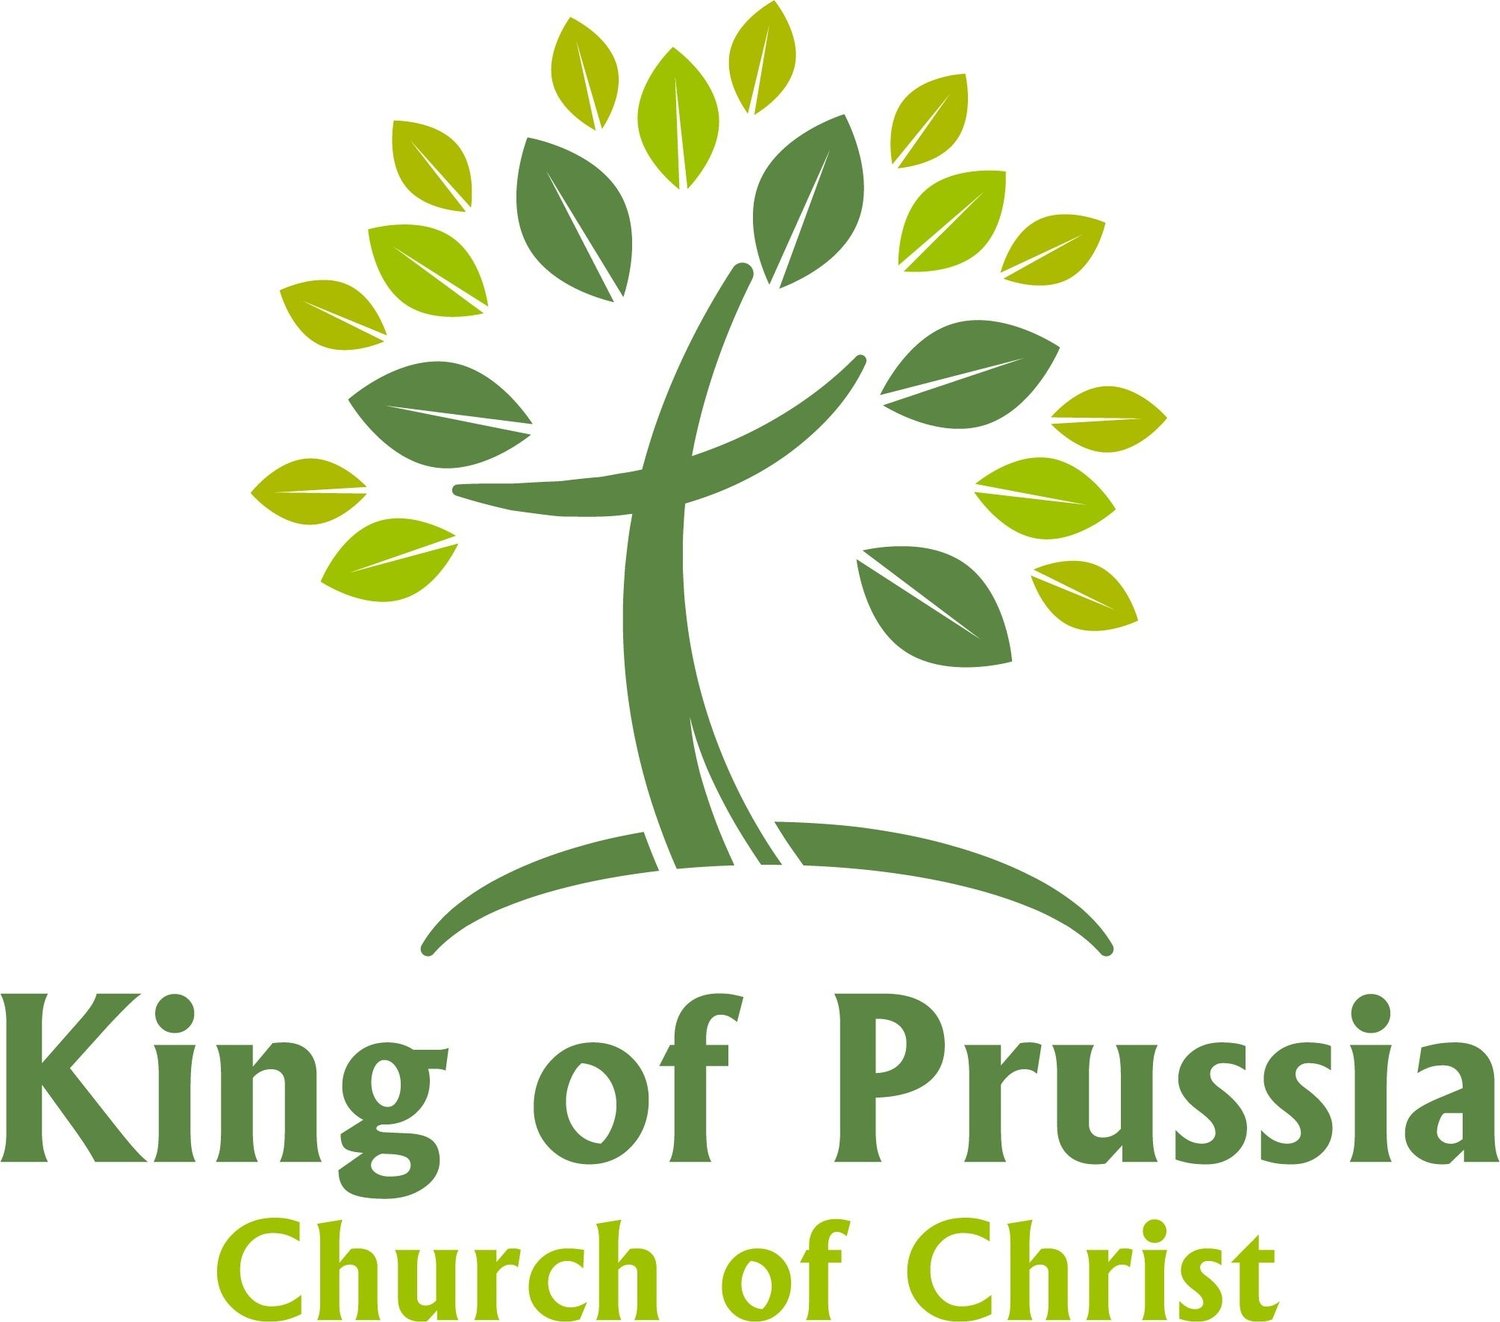 King of Prussia Church of Christ